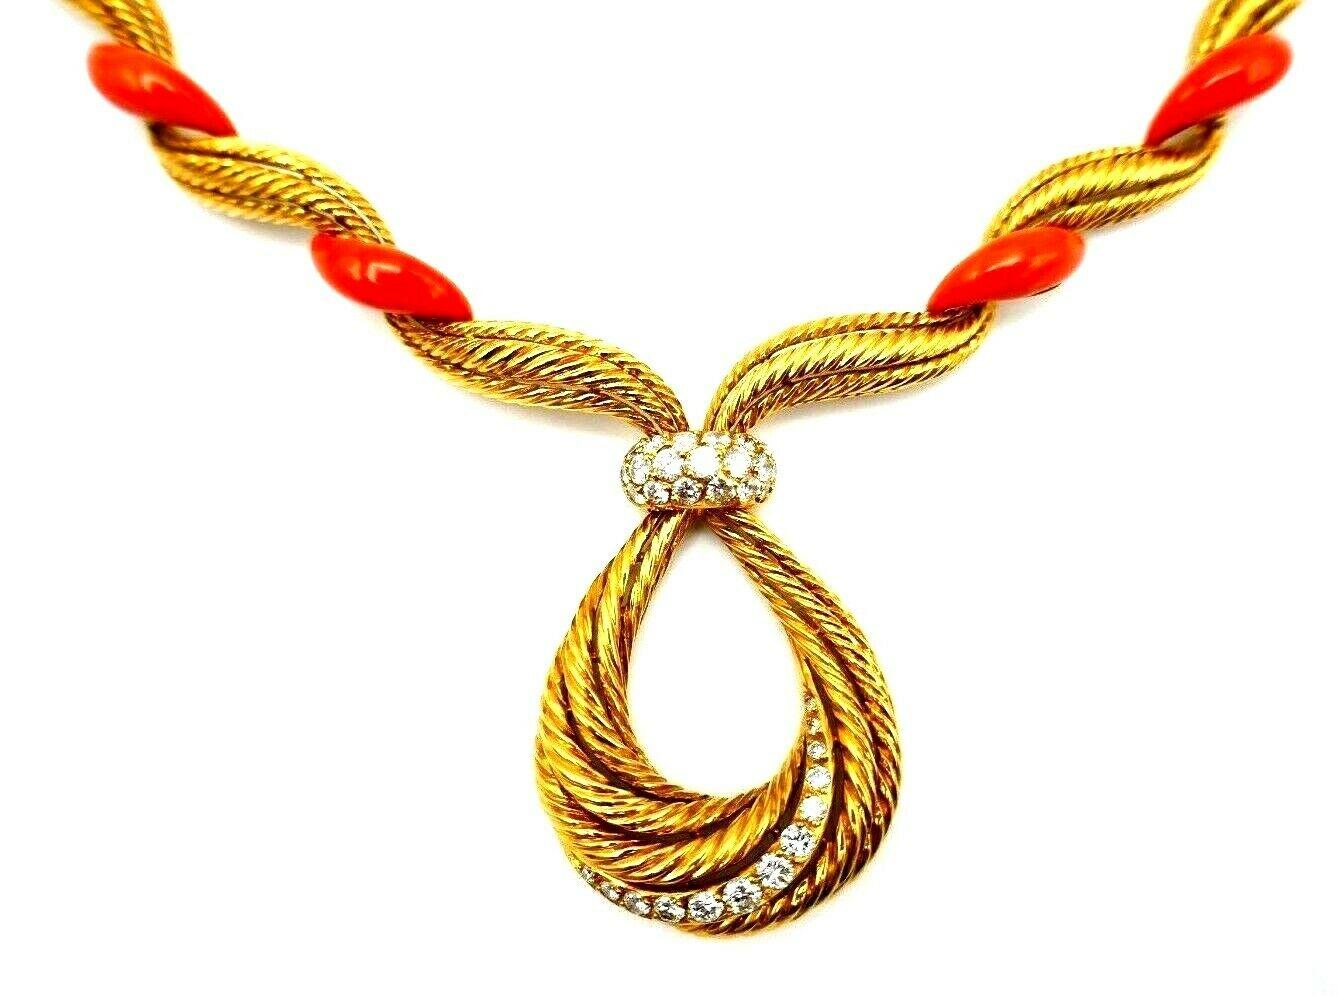 An exquisite vintage French necklace made of coral and 18k yellow gold featuring diamond. Swirling textured gold elements are connected with the beautiful coral parts. The drop is accented with round cut graduated diamonds. The diamond size varies